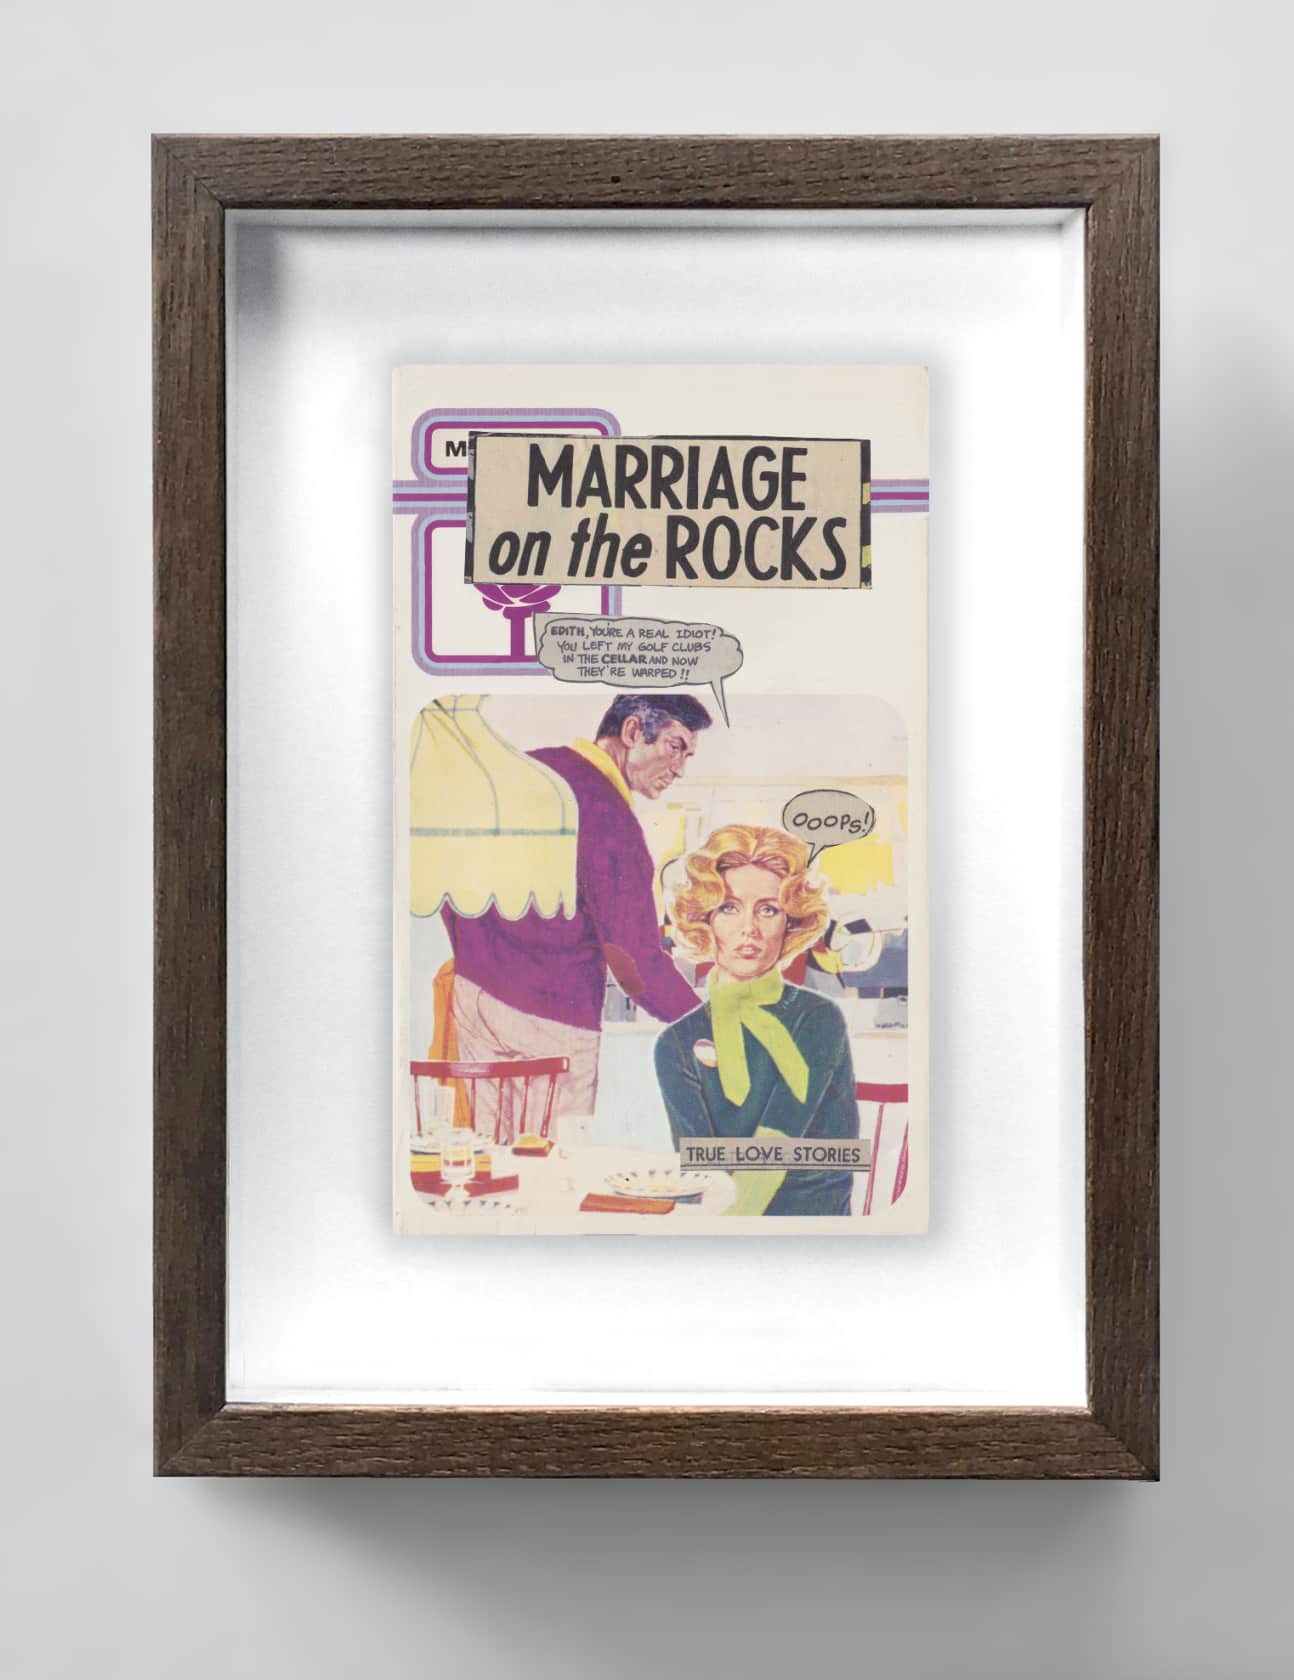 the connor brothers Marriage On The Rocks Collage on vintage paperback book